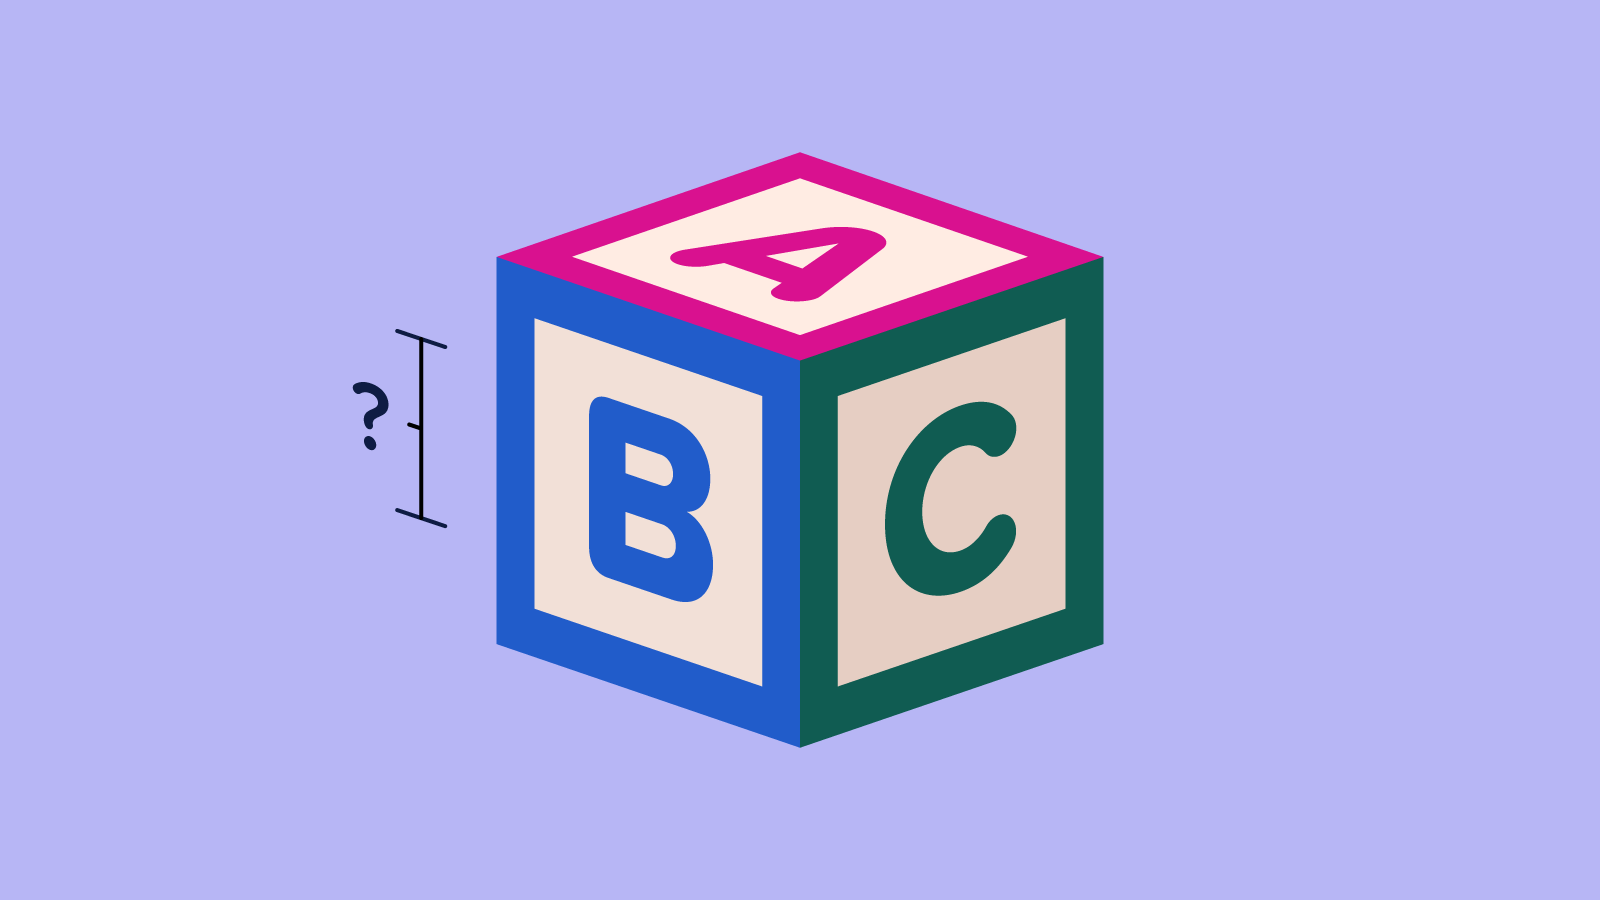 A child's block with the letters 'A,' 'B' and 'C' on the visible sides. An indicator of one side's font size is labeled with a question mark, perhaps a question to be answered in the article itself.